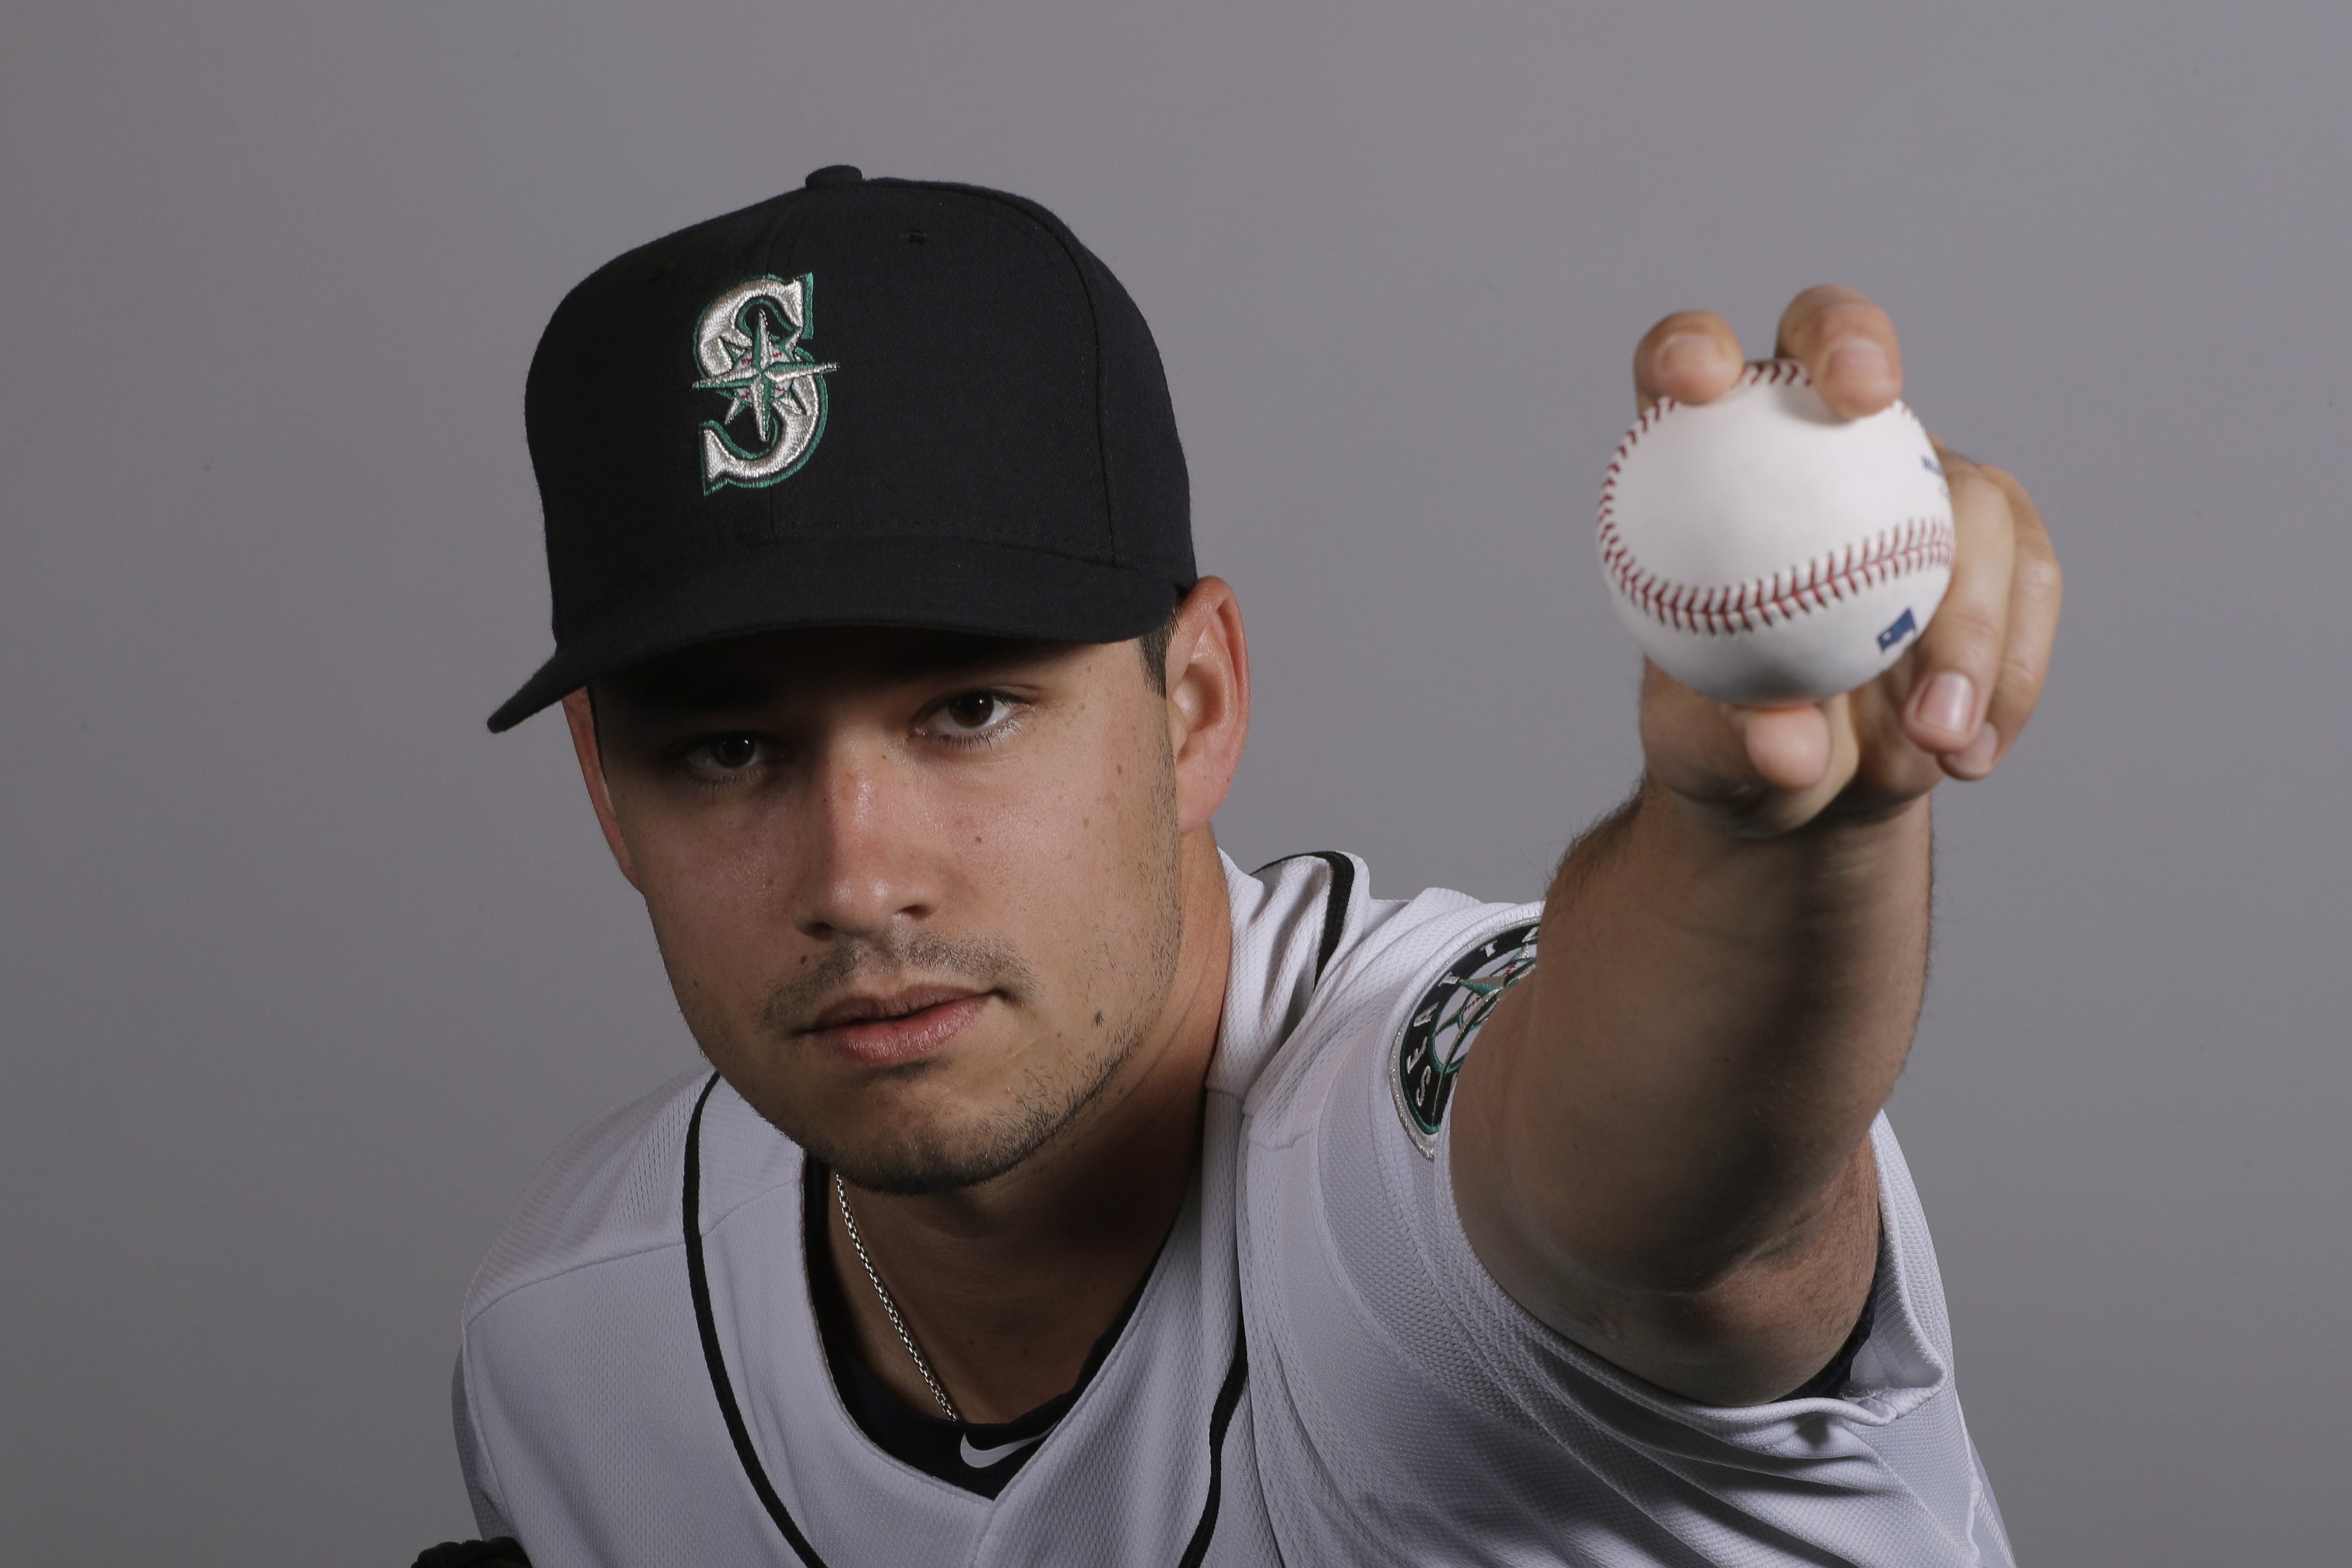 Marco Gonzales was named the starting pitcher for the Seattle Mariners in their regular-season opening game against the Oakland Athletics in Japan.